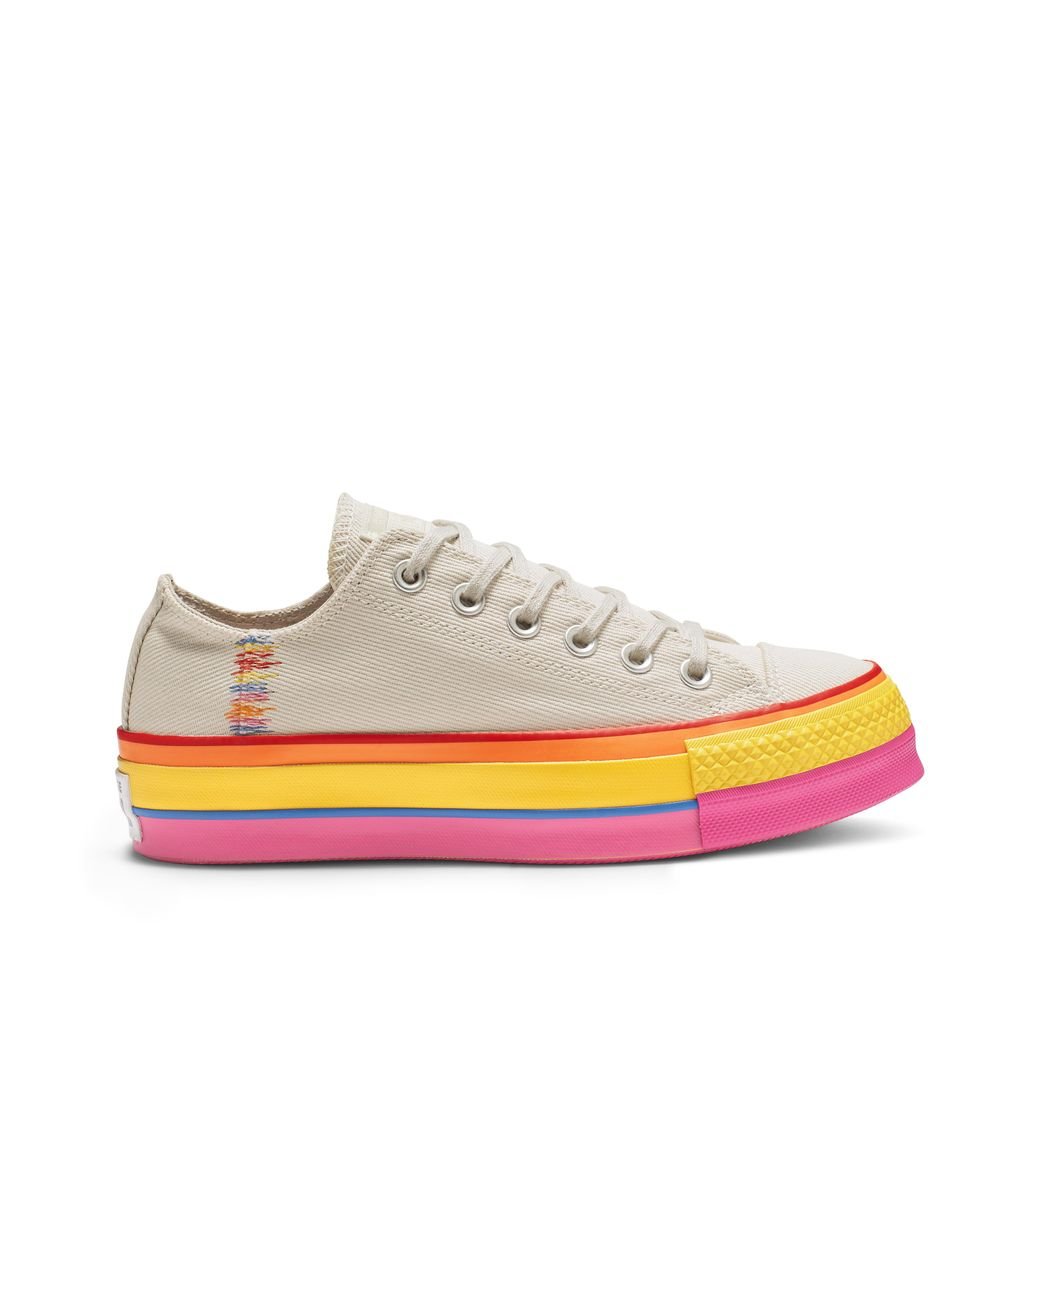 Converse Chuck Taylor All Star Rainbow Platform Top in White | Lyst